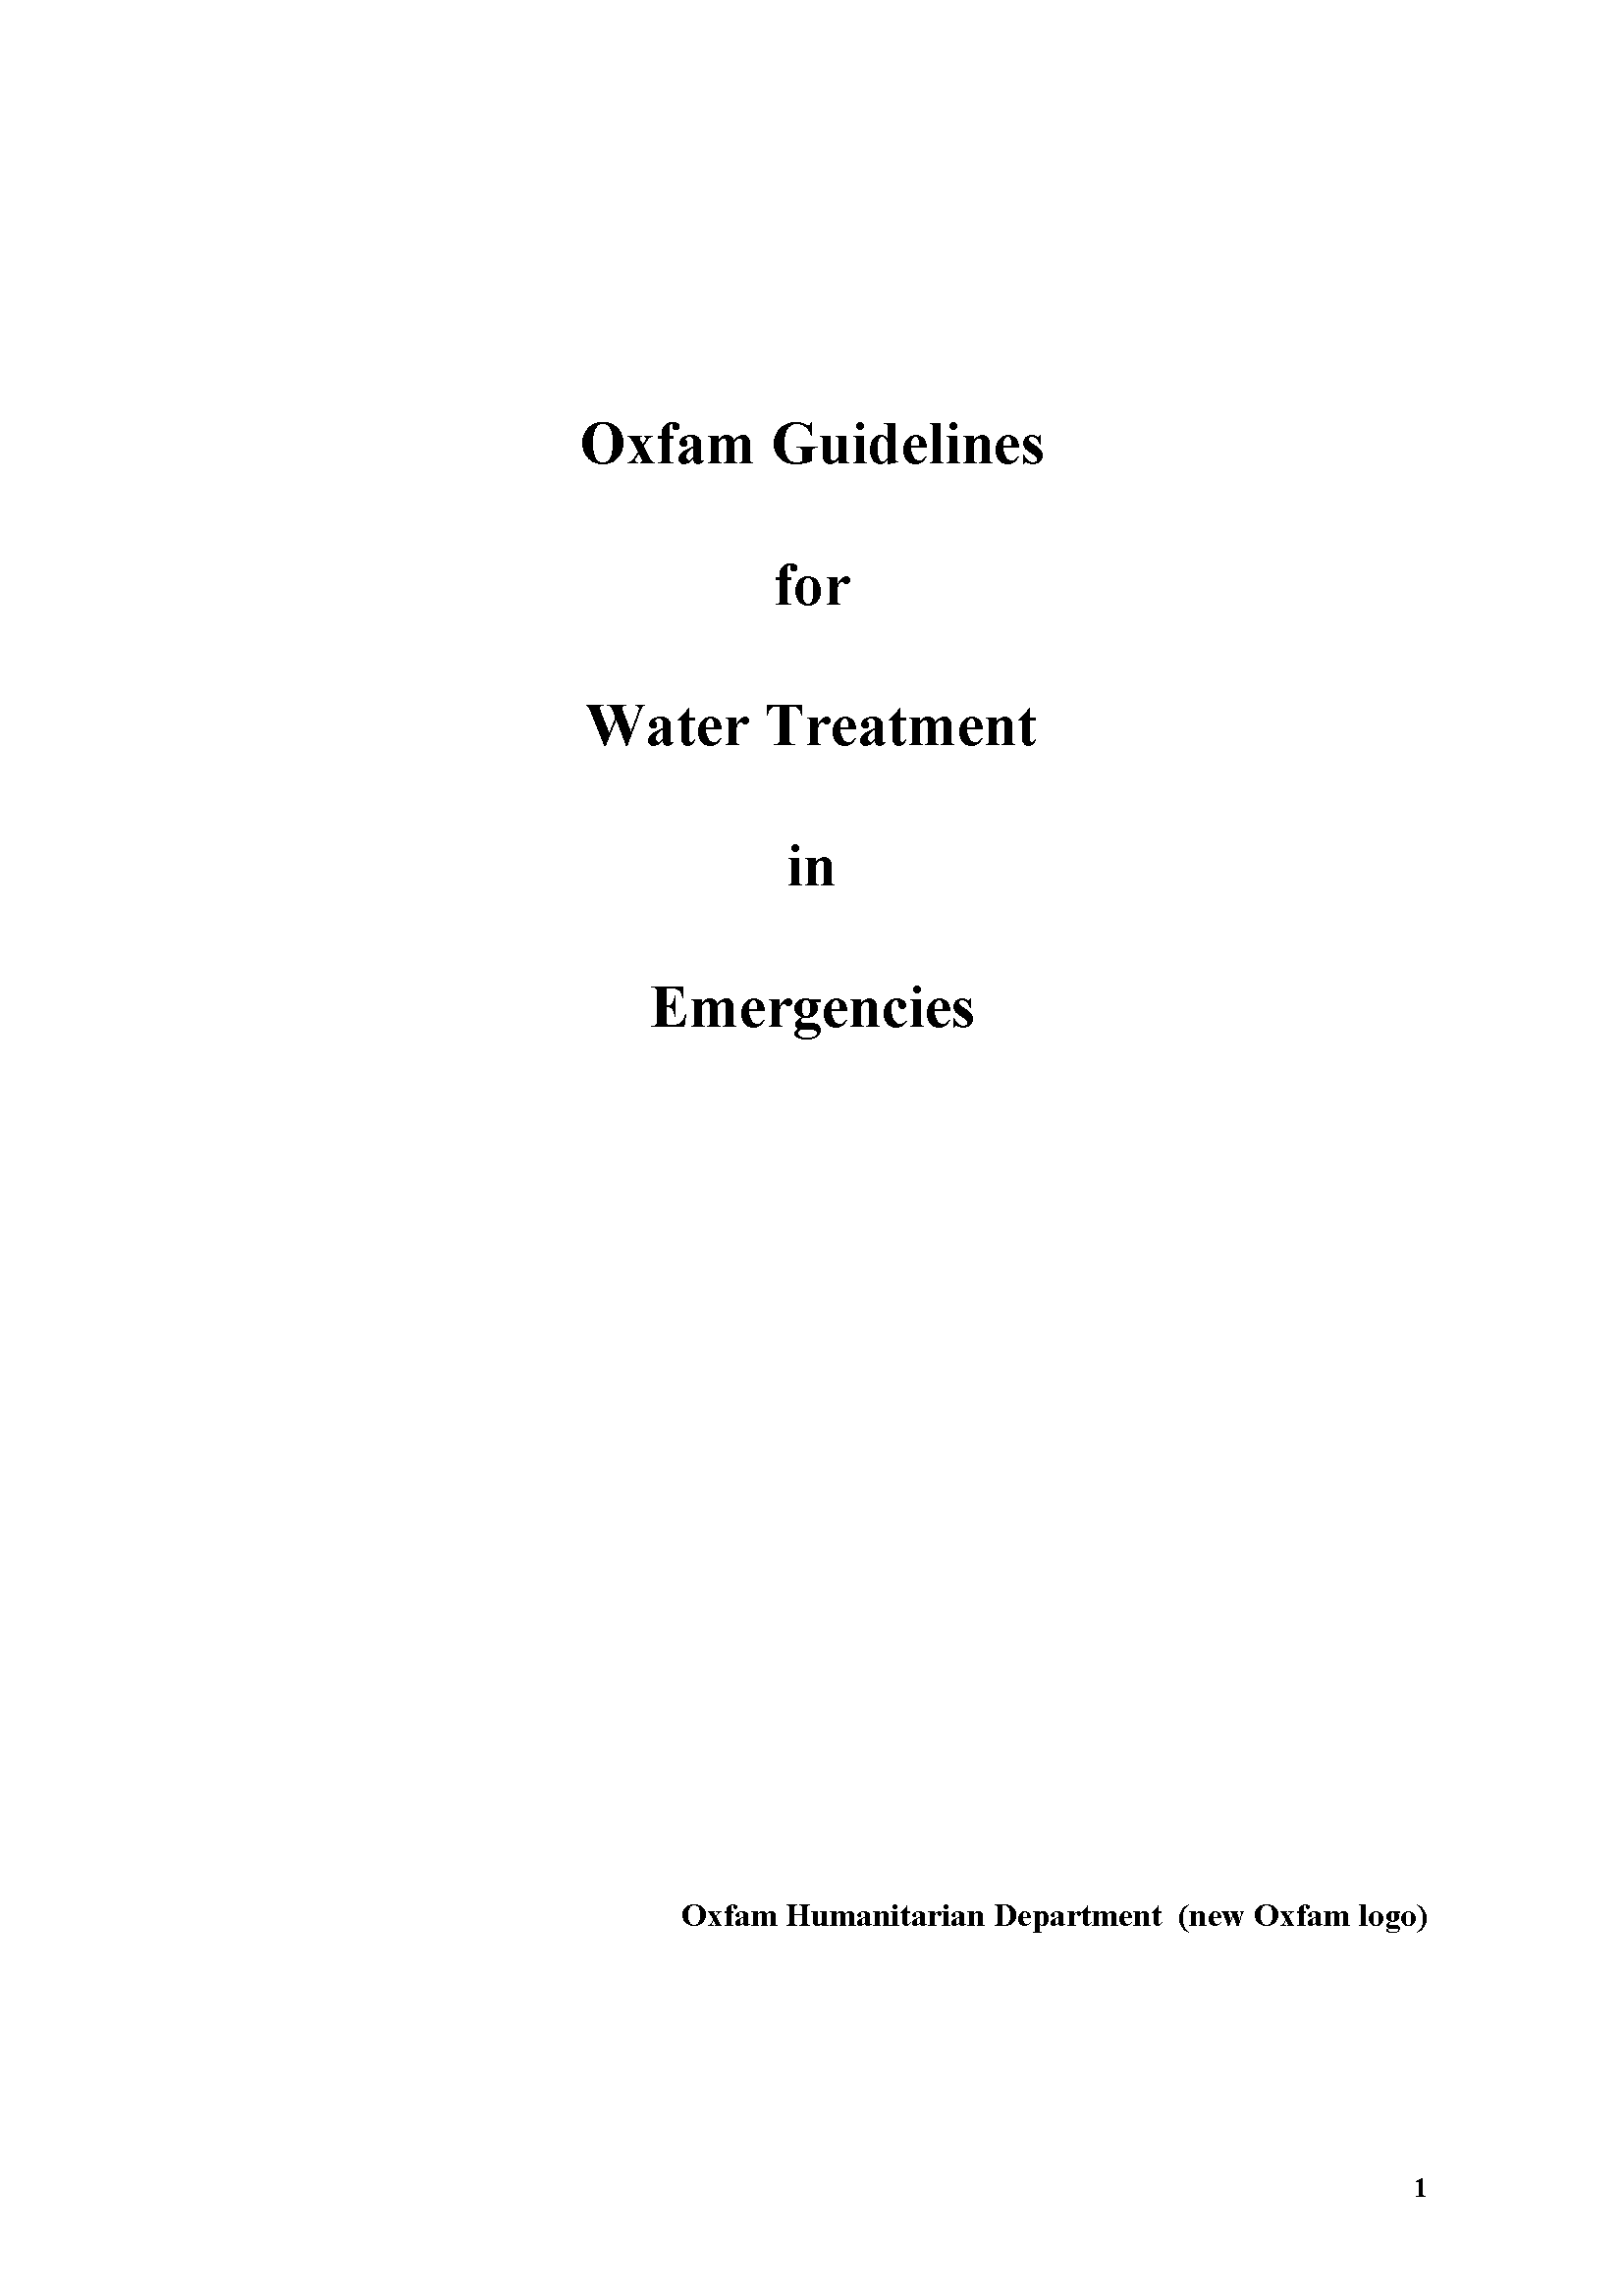 Cover page for Water Treatment Guidelines For Use in Emergencies